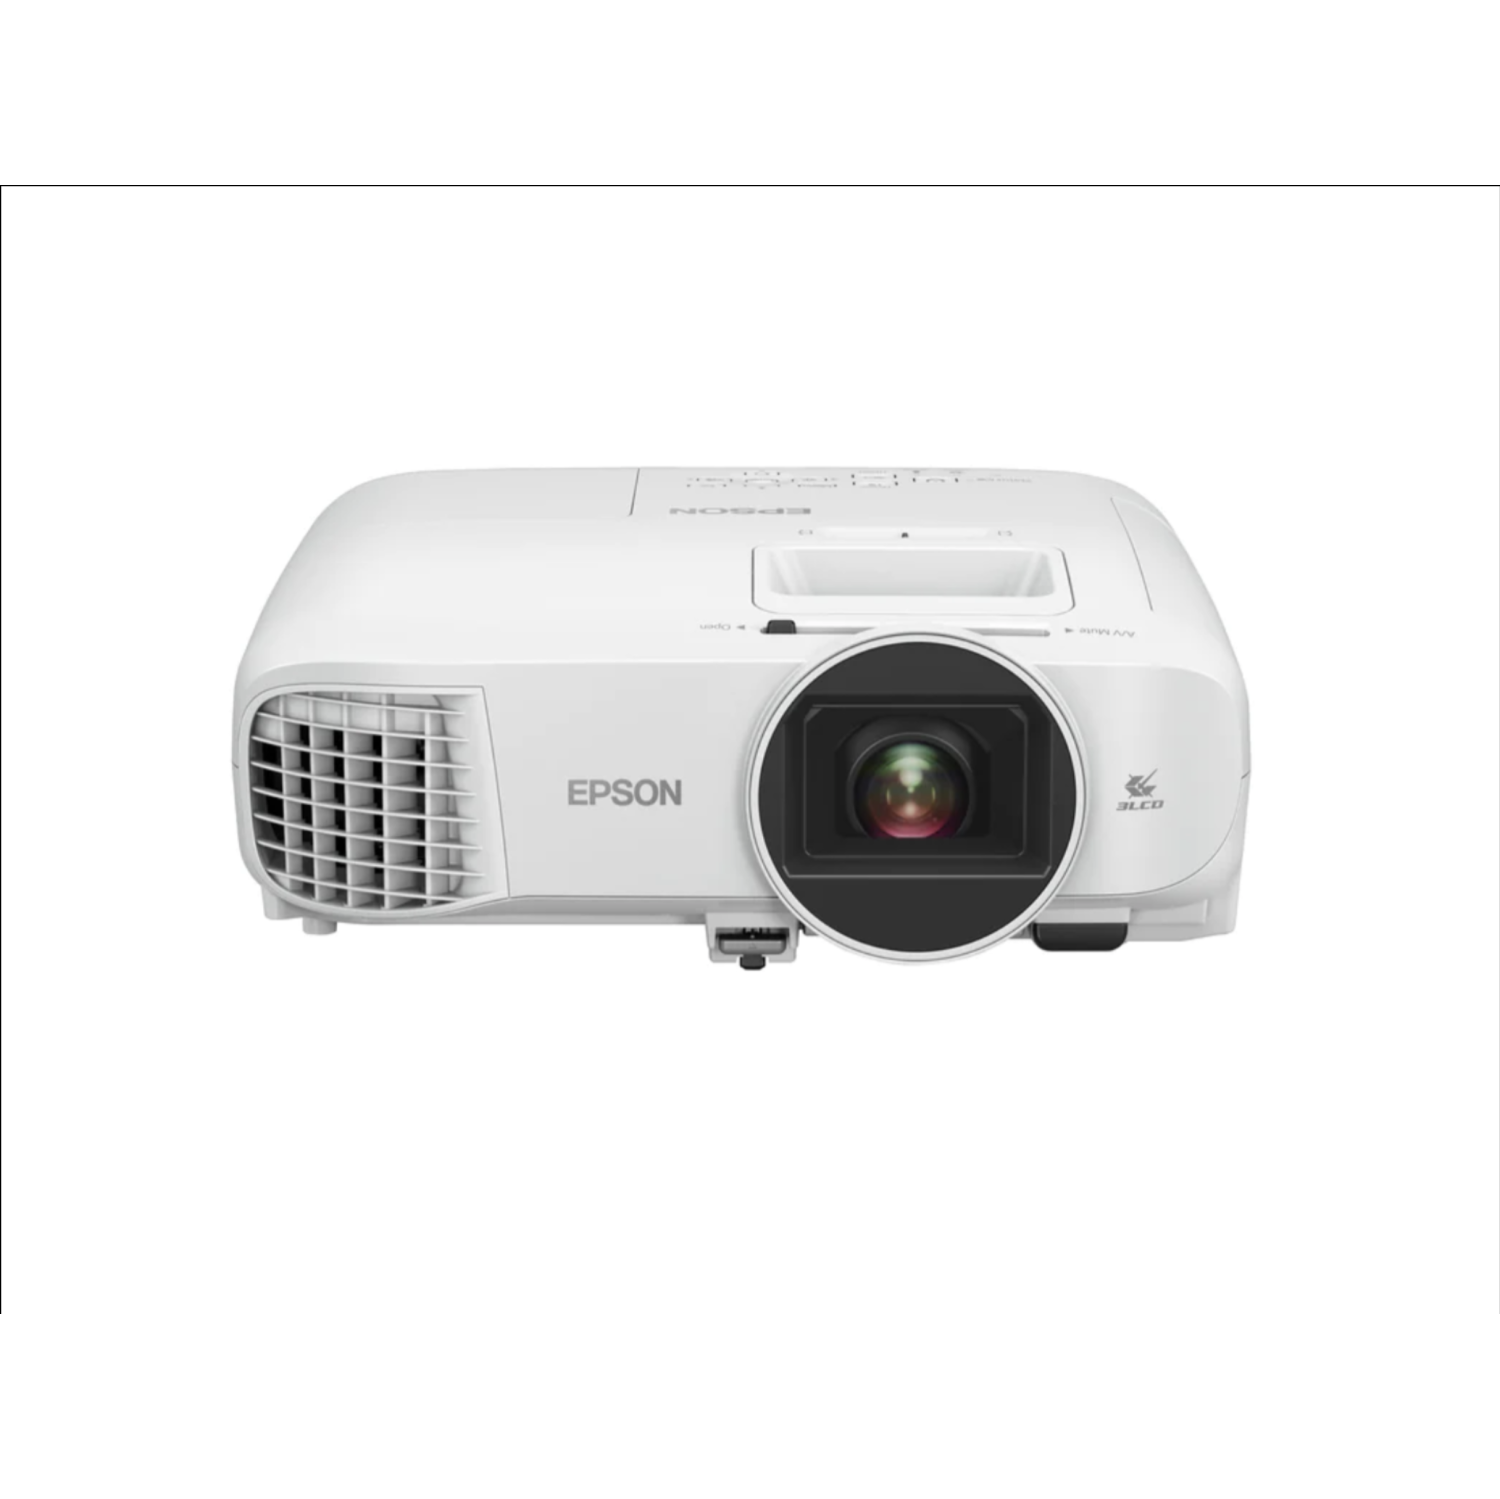 Refurbished (Excellent) - Epson Home Cinema 2100 Full HD 3LCD Home Theater Projector